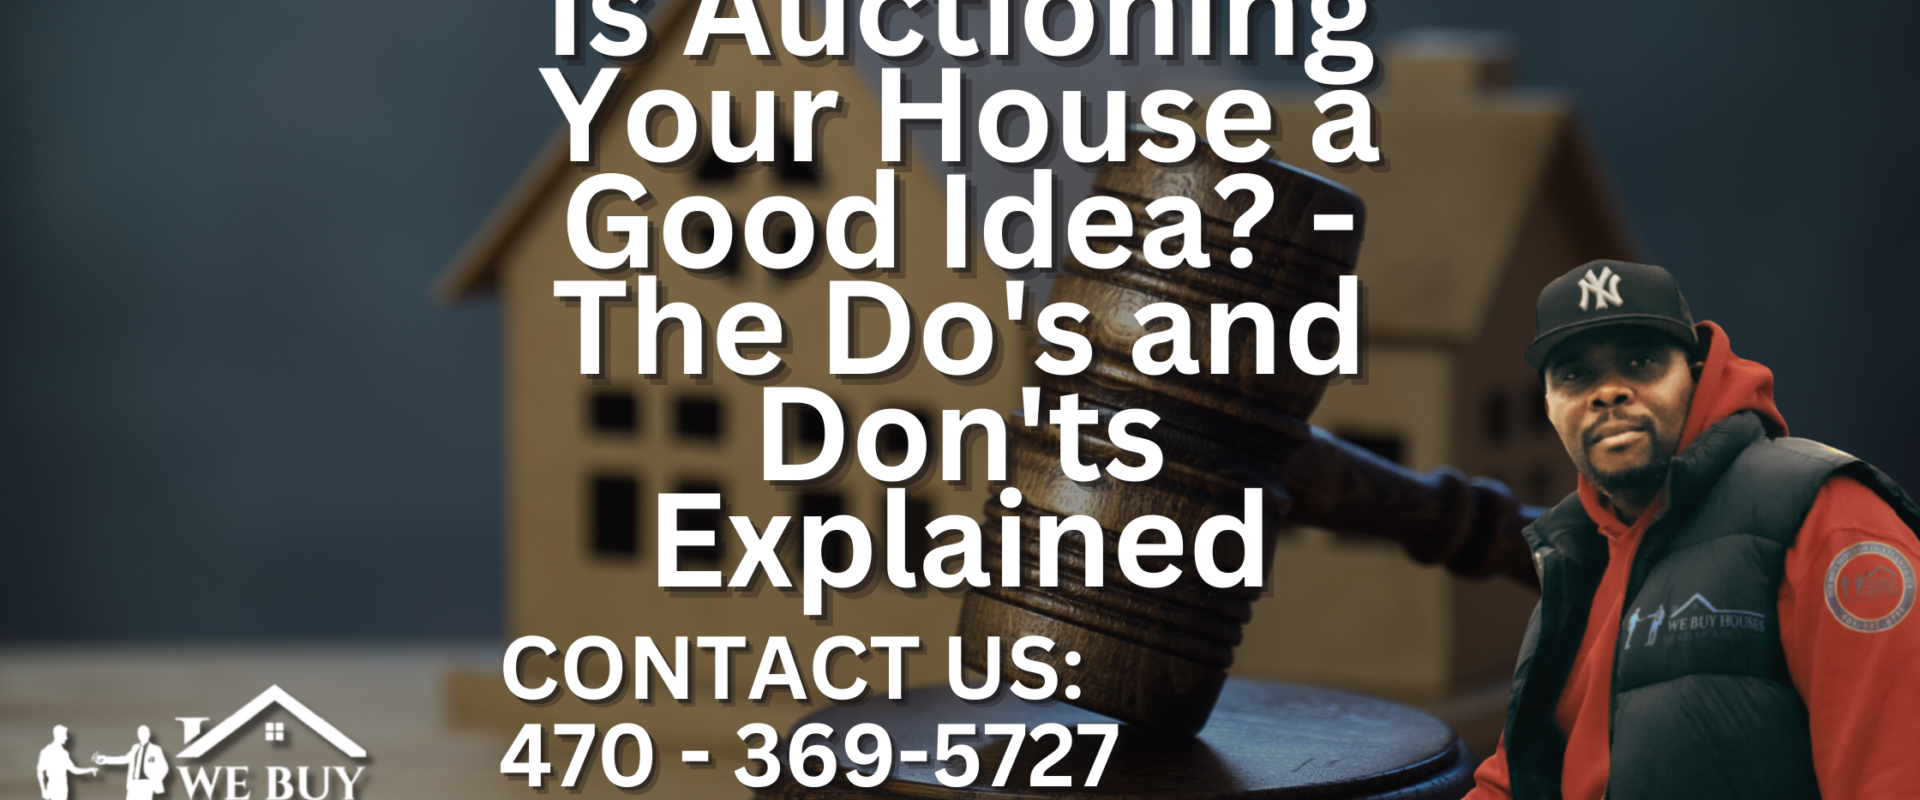 Is Auctioning Your House a Good Idea? - The Do's and Don'ts Explained